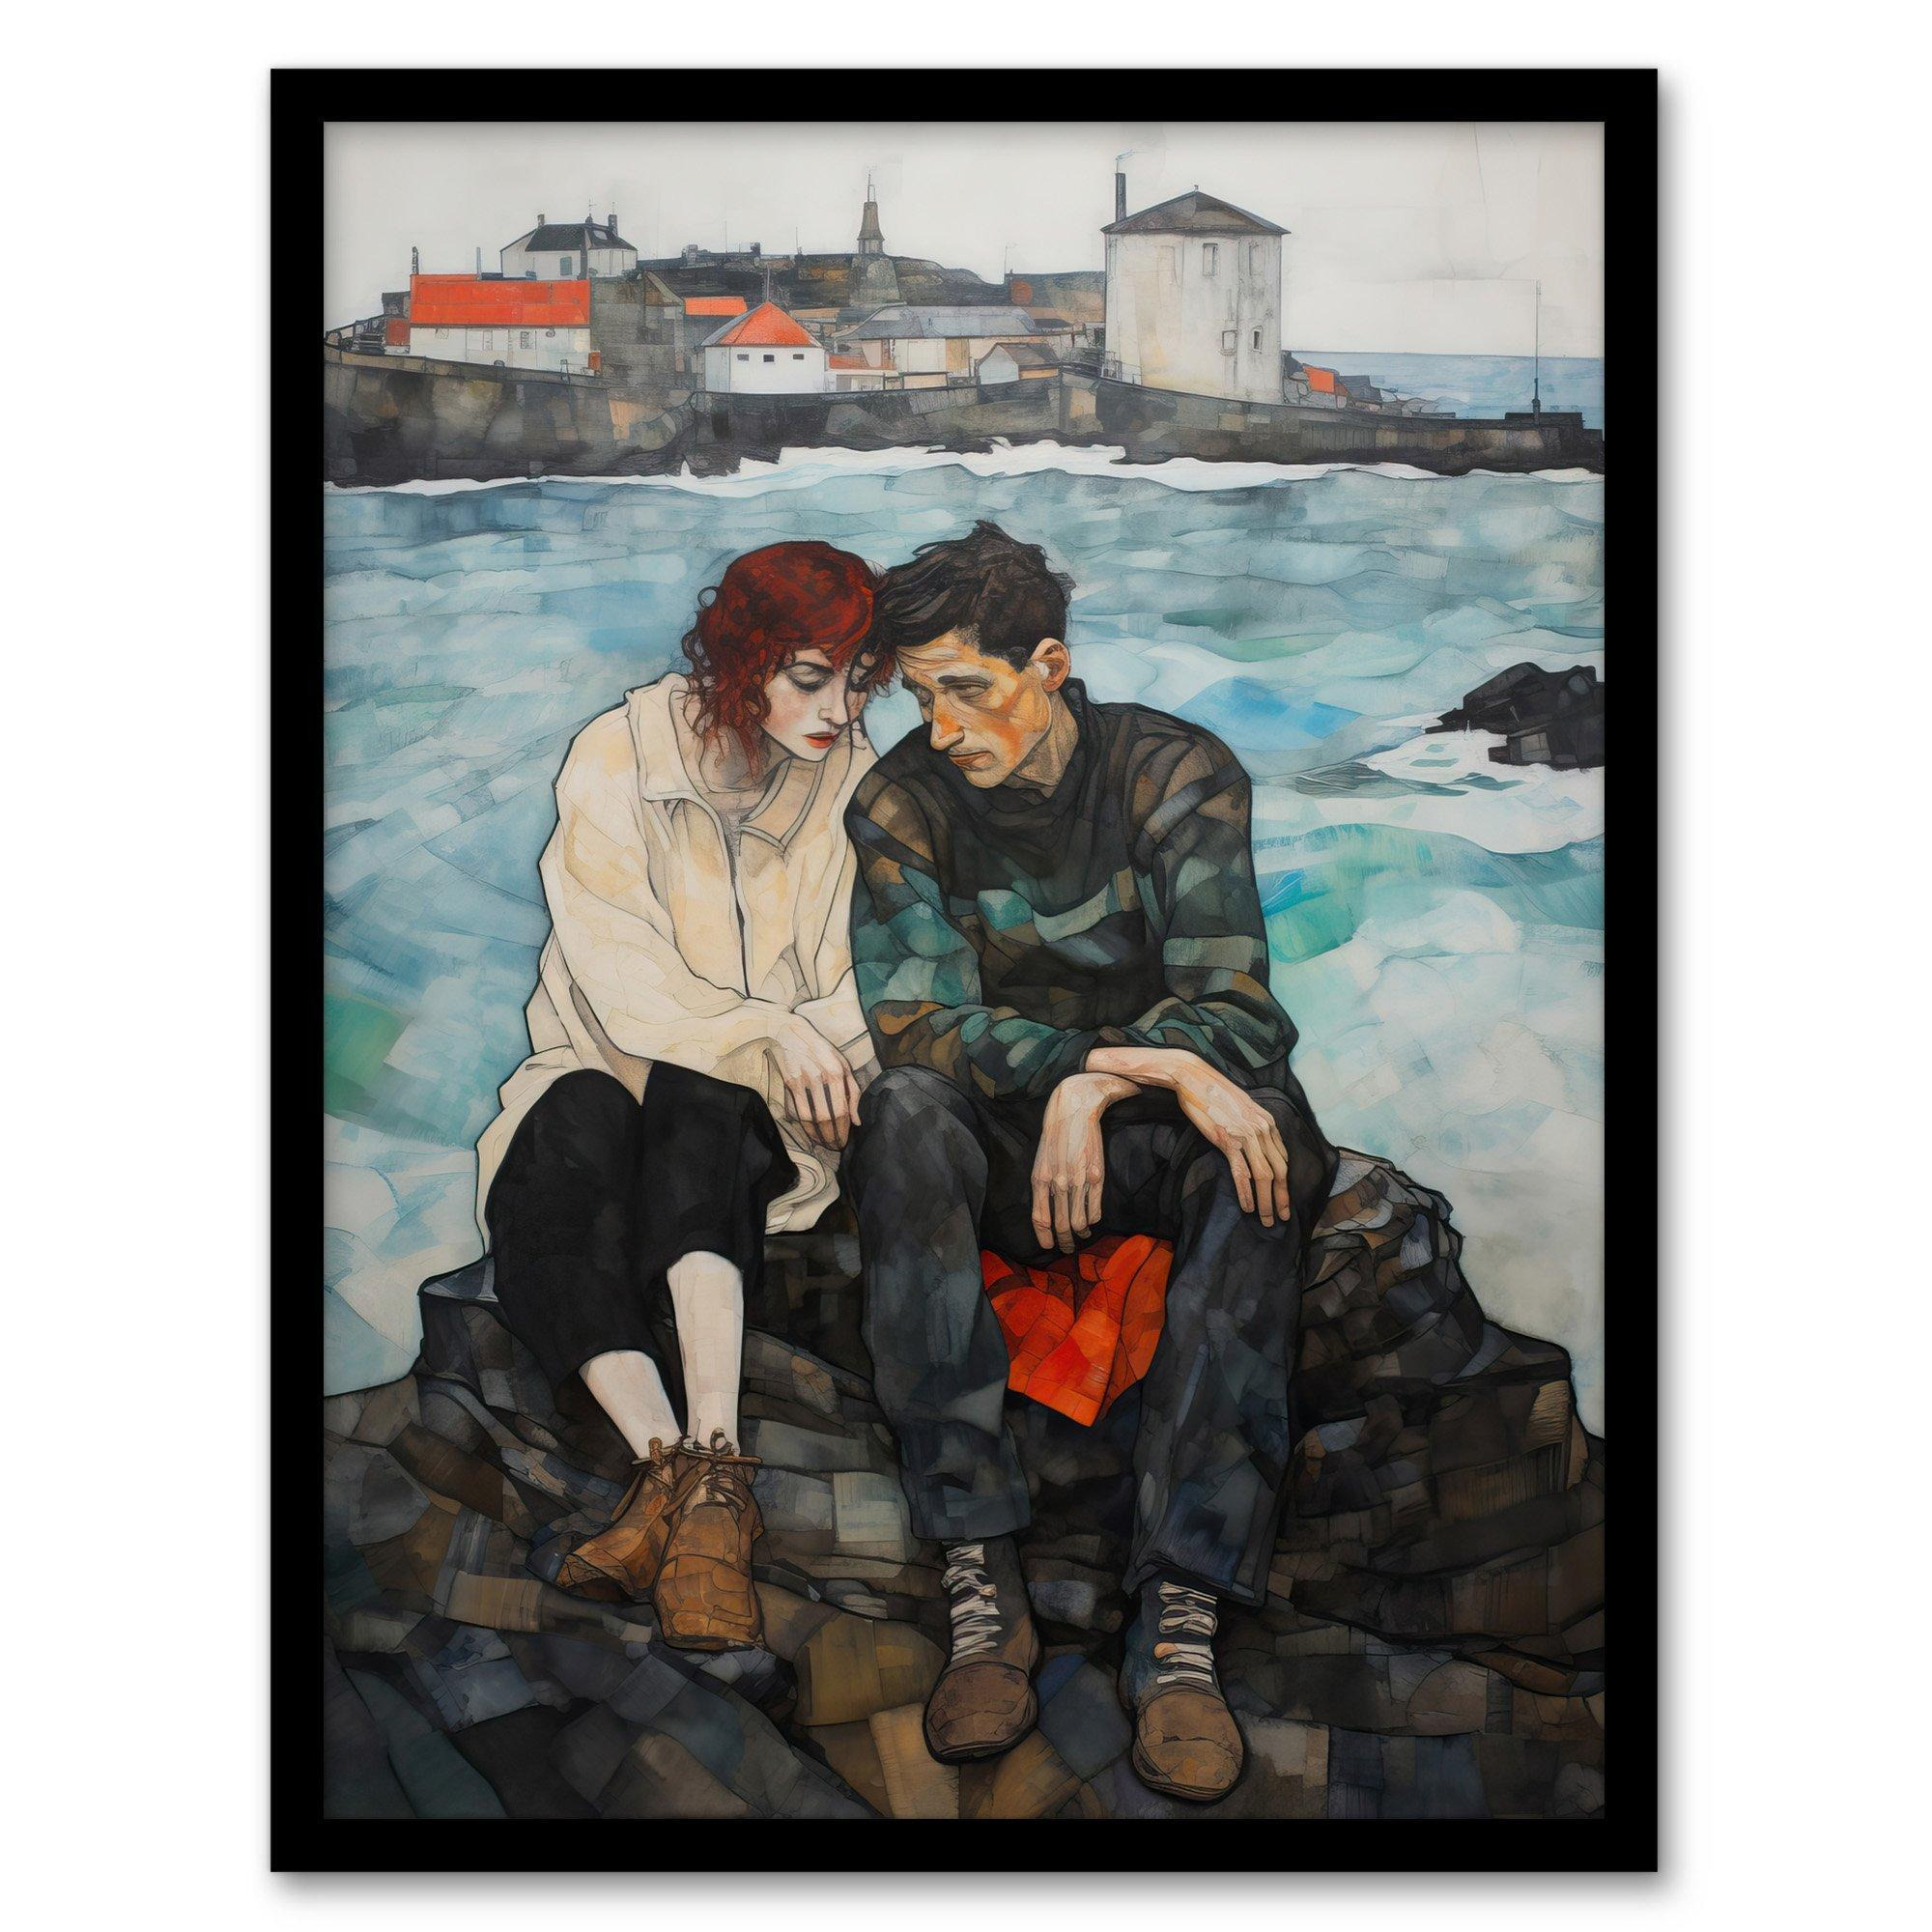 Wall Art Print The Heart To Heart Egon Schiele Style Couple Sitting in Coastal Landscape Blue Grey Red Oil Painting Art Framed - image 1